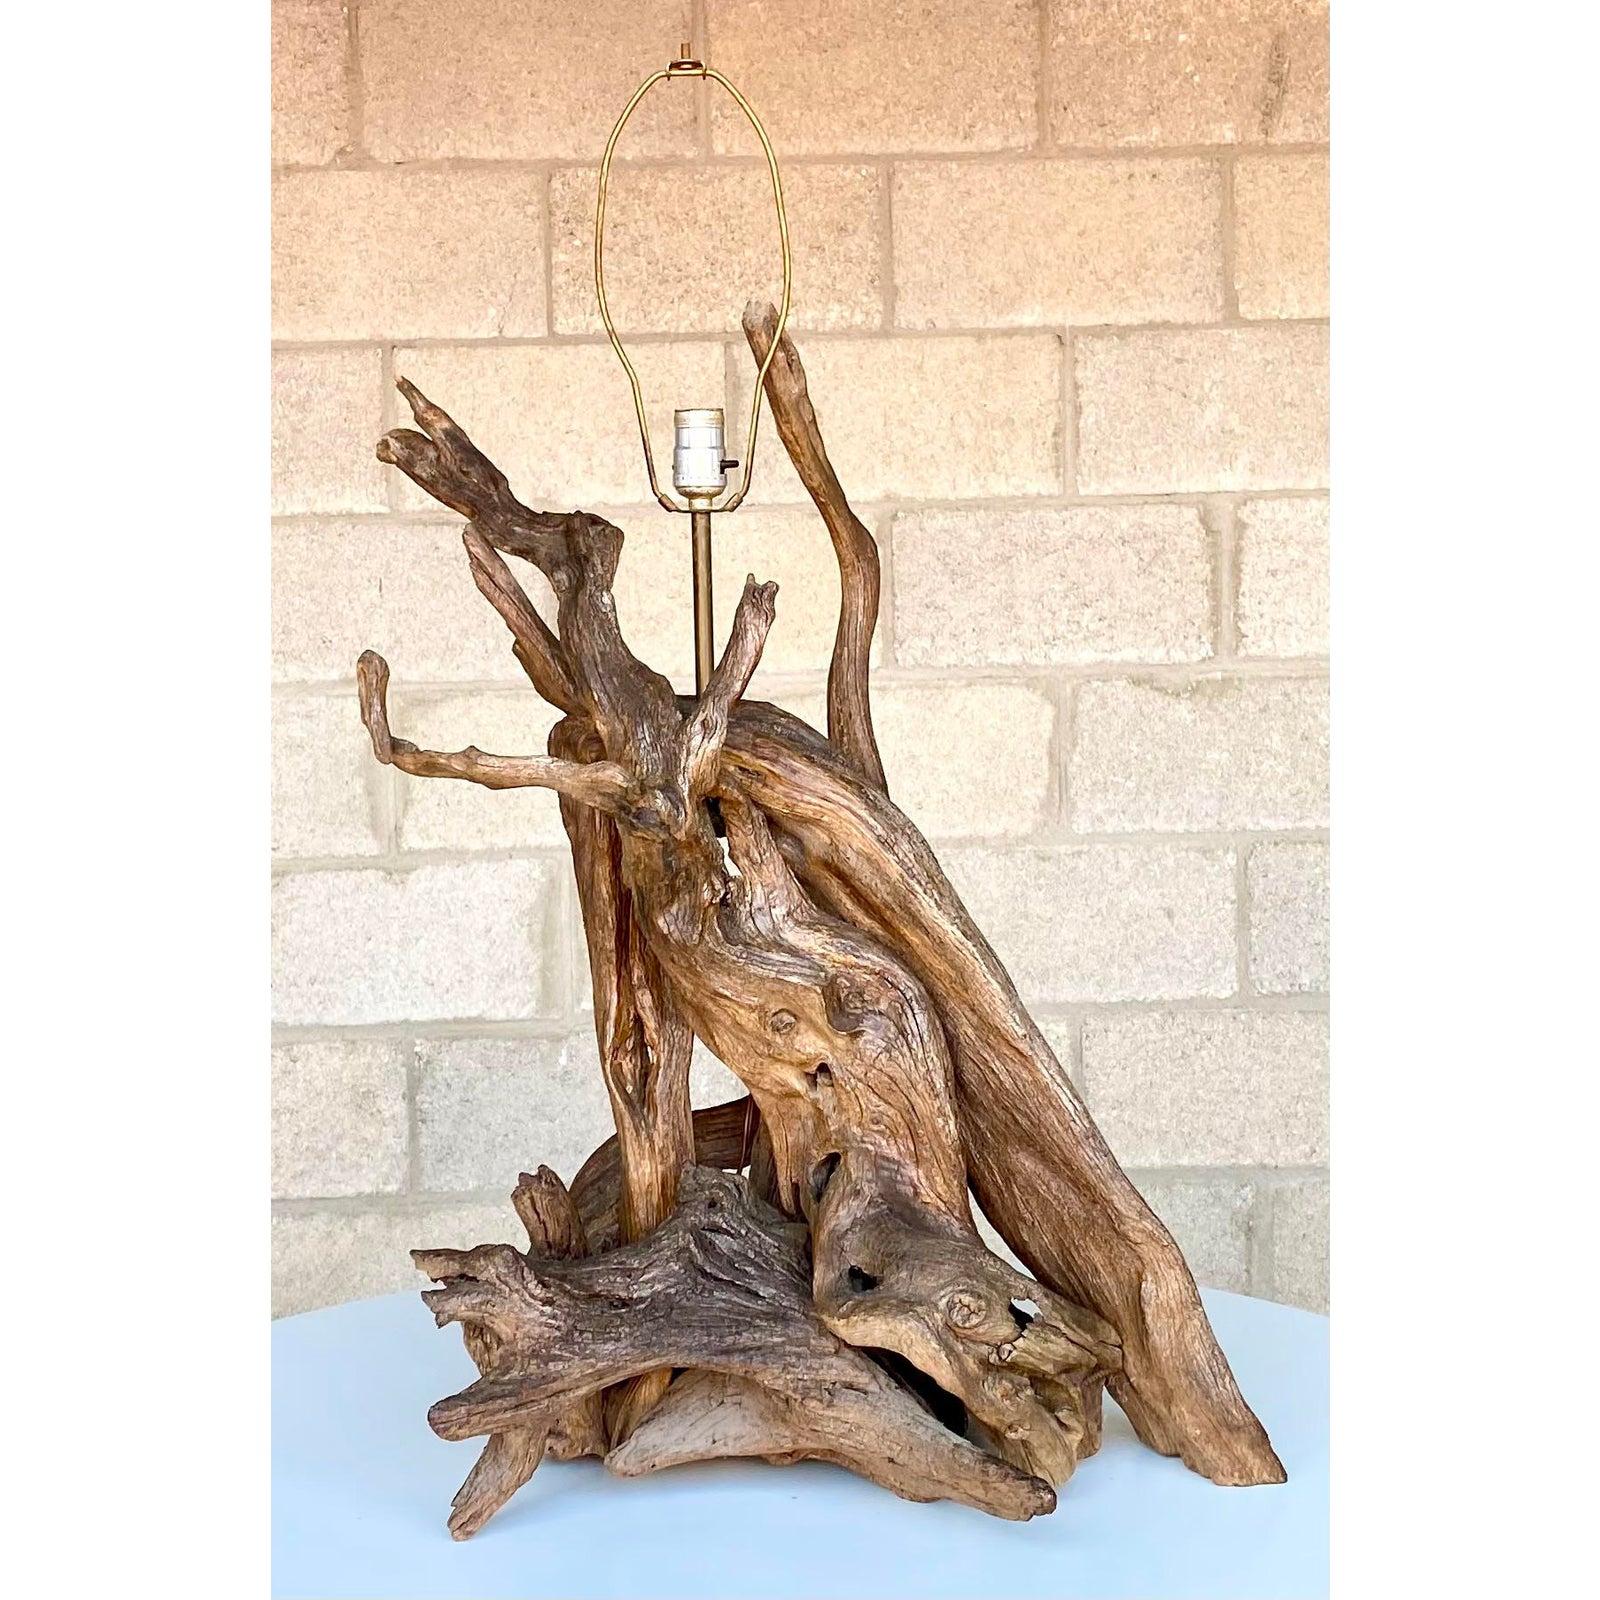 Incredible vintage driftwood lamp. Monumental in size and drama. A gnarly combination of twisted branches make up this impressive lamp. Acquired from a Palm Beach estate.